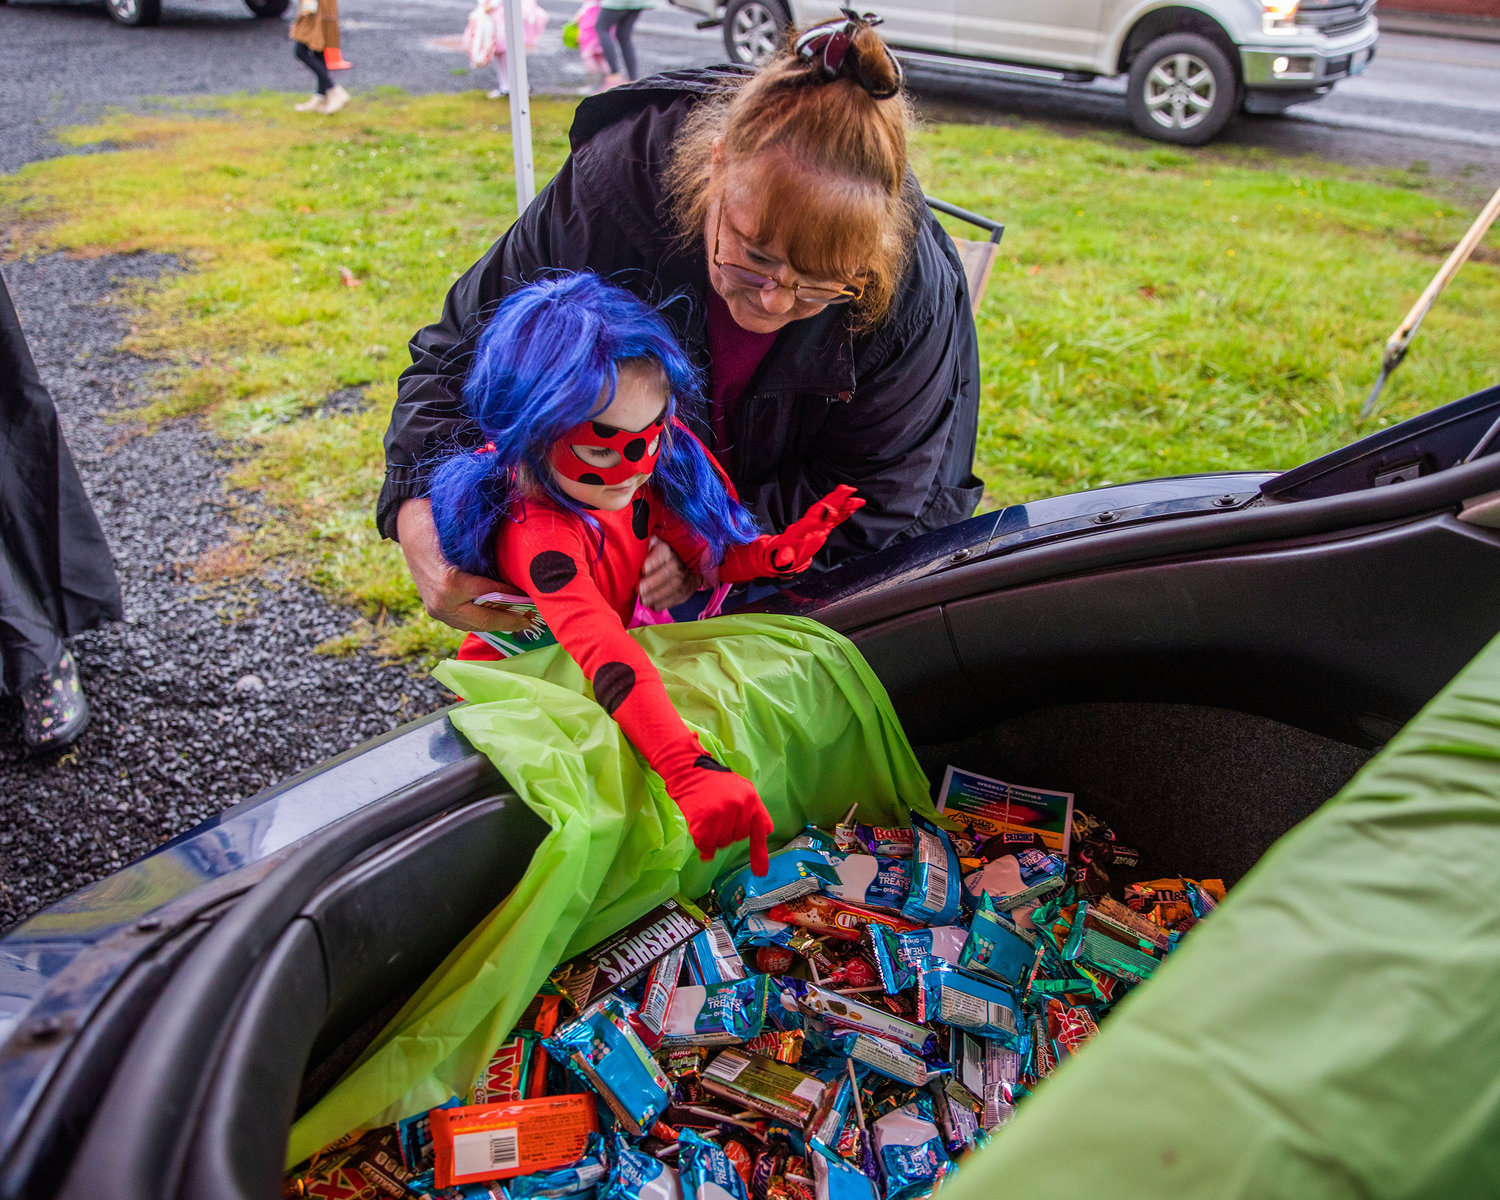 Children are helped to a trunk full of candy during Egg-O-Lantern festivities in Winlock on Halloween.